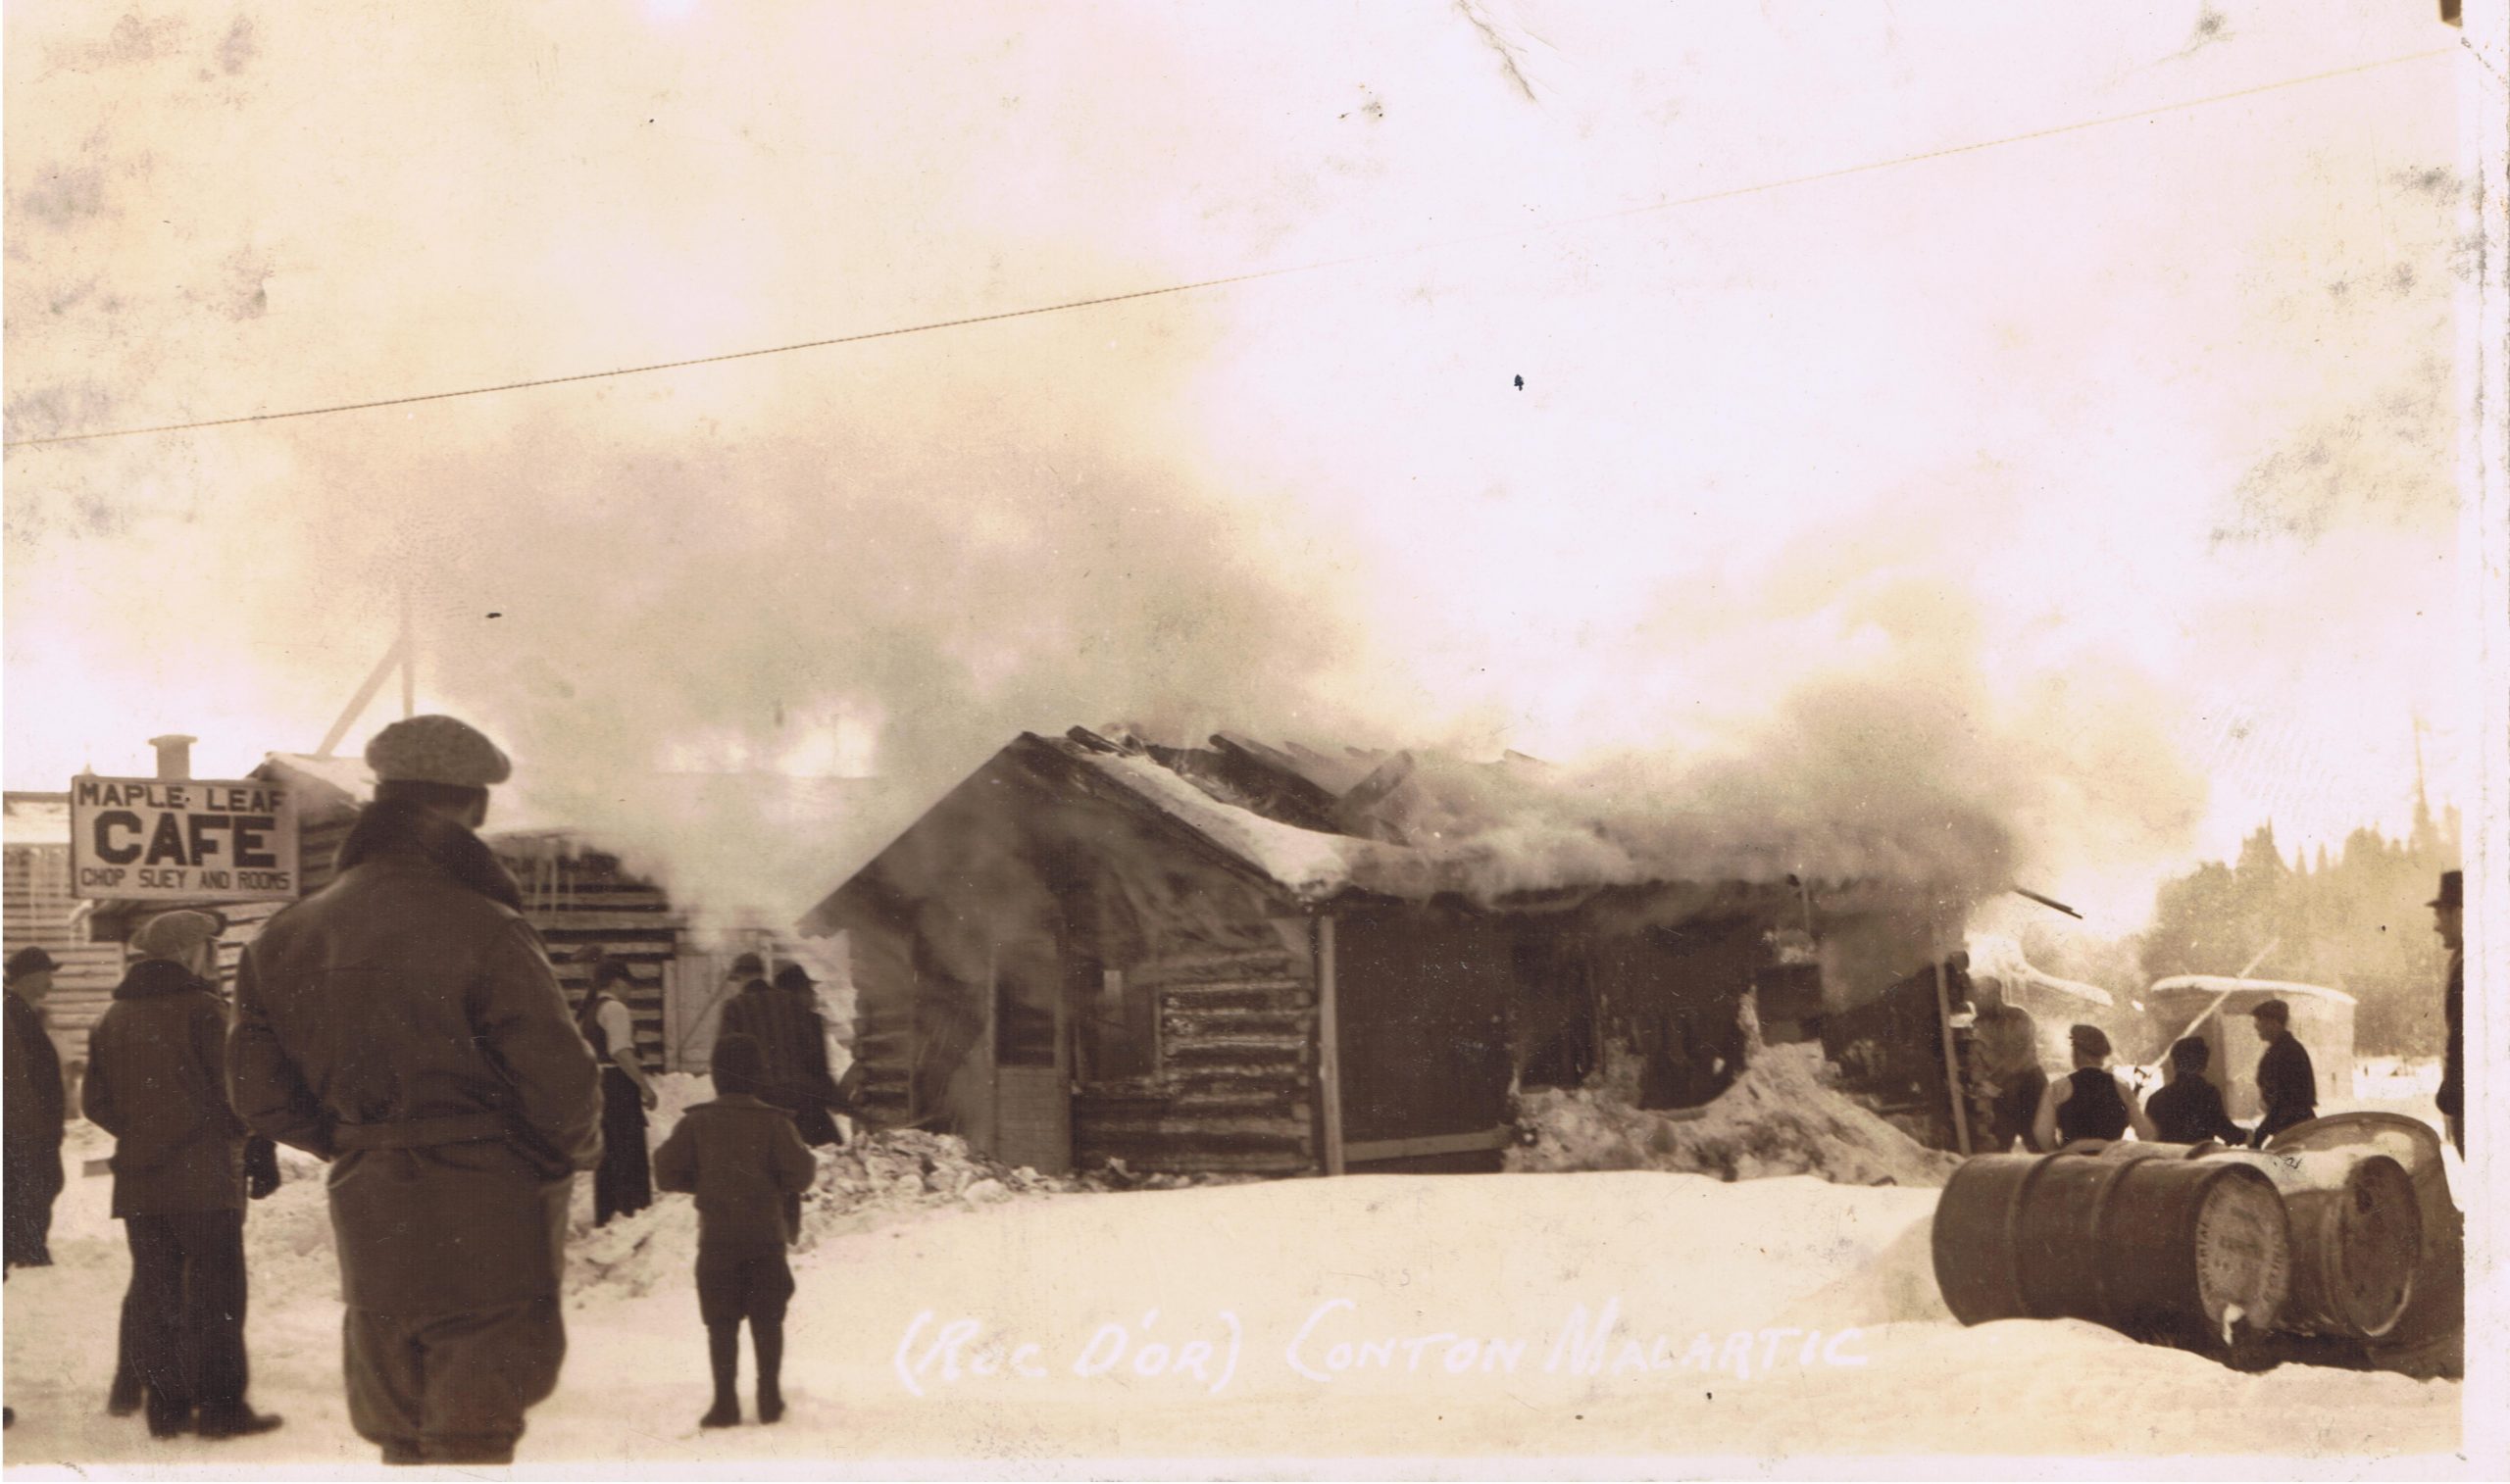 Sepia photograph of a log cabin set on fire. A large cloud of smoke fills the upper half of the photograph. A dozen curious onlookers attend the scene. On the left is a sign, "Maple Leaf CAFE Chop Suey and Rooms".